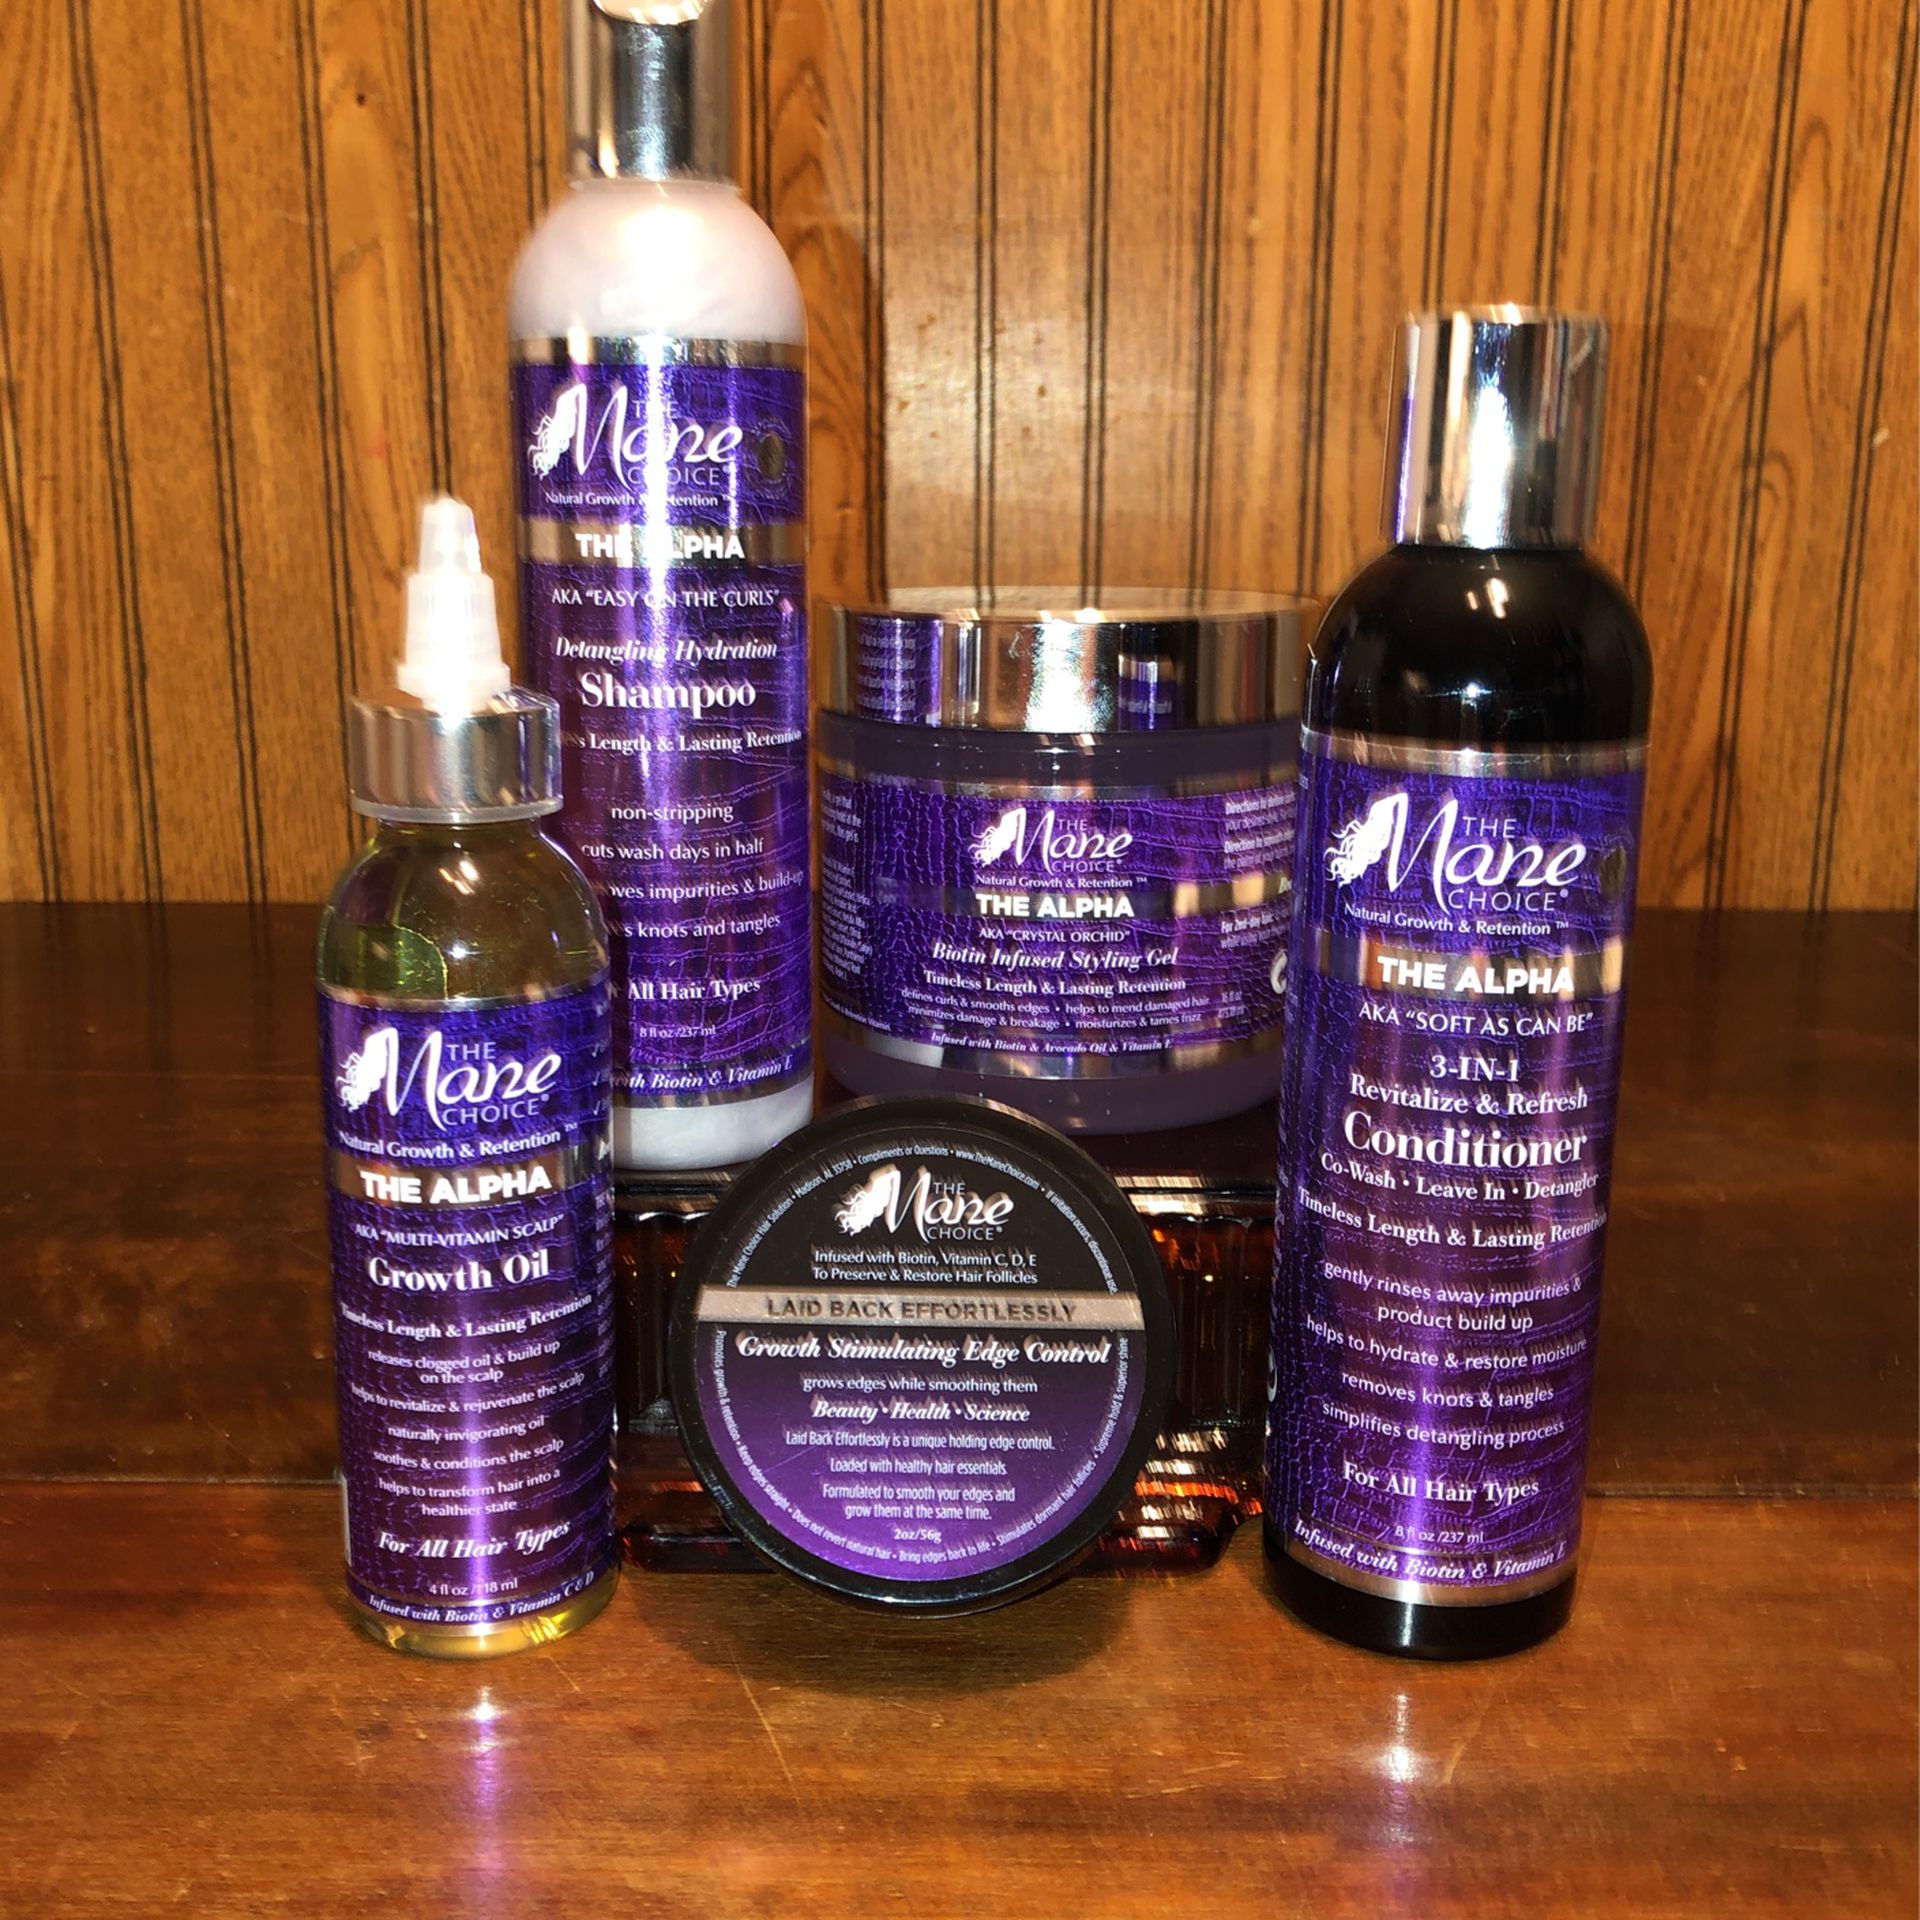 All Brand NEW! 🎆 The Mane Choice - Hair Care Products (((PENDING PICK UP TODAY 4-5pm)))